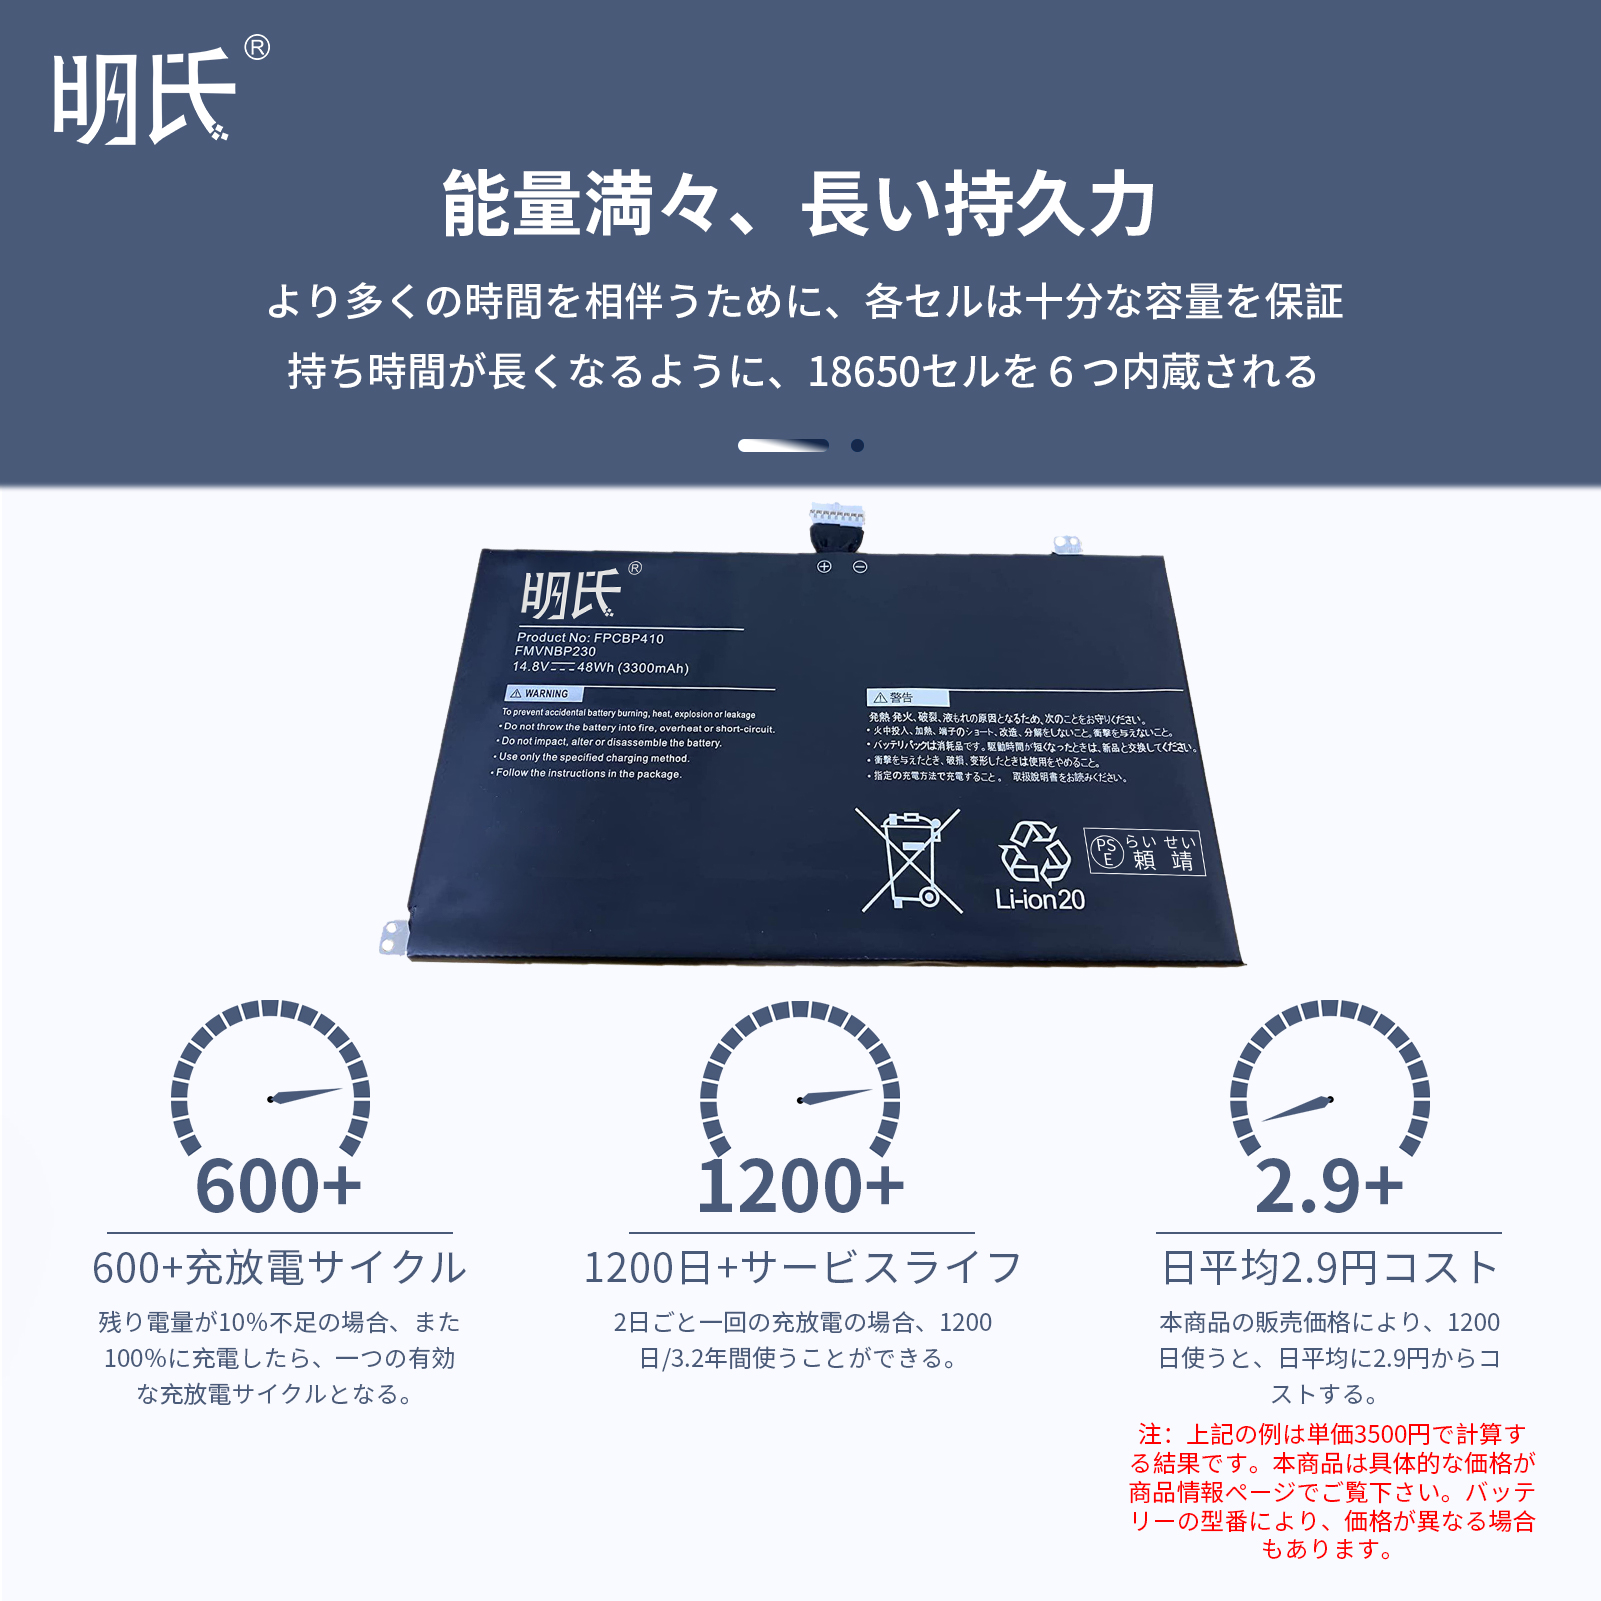 LIFEBOOK uh（ノートパソコンバッテリー）の商品一覧｜ノートパソコン